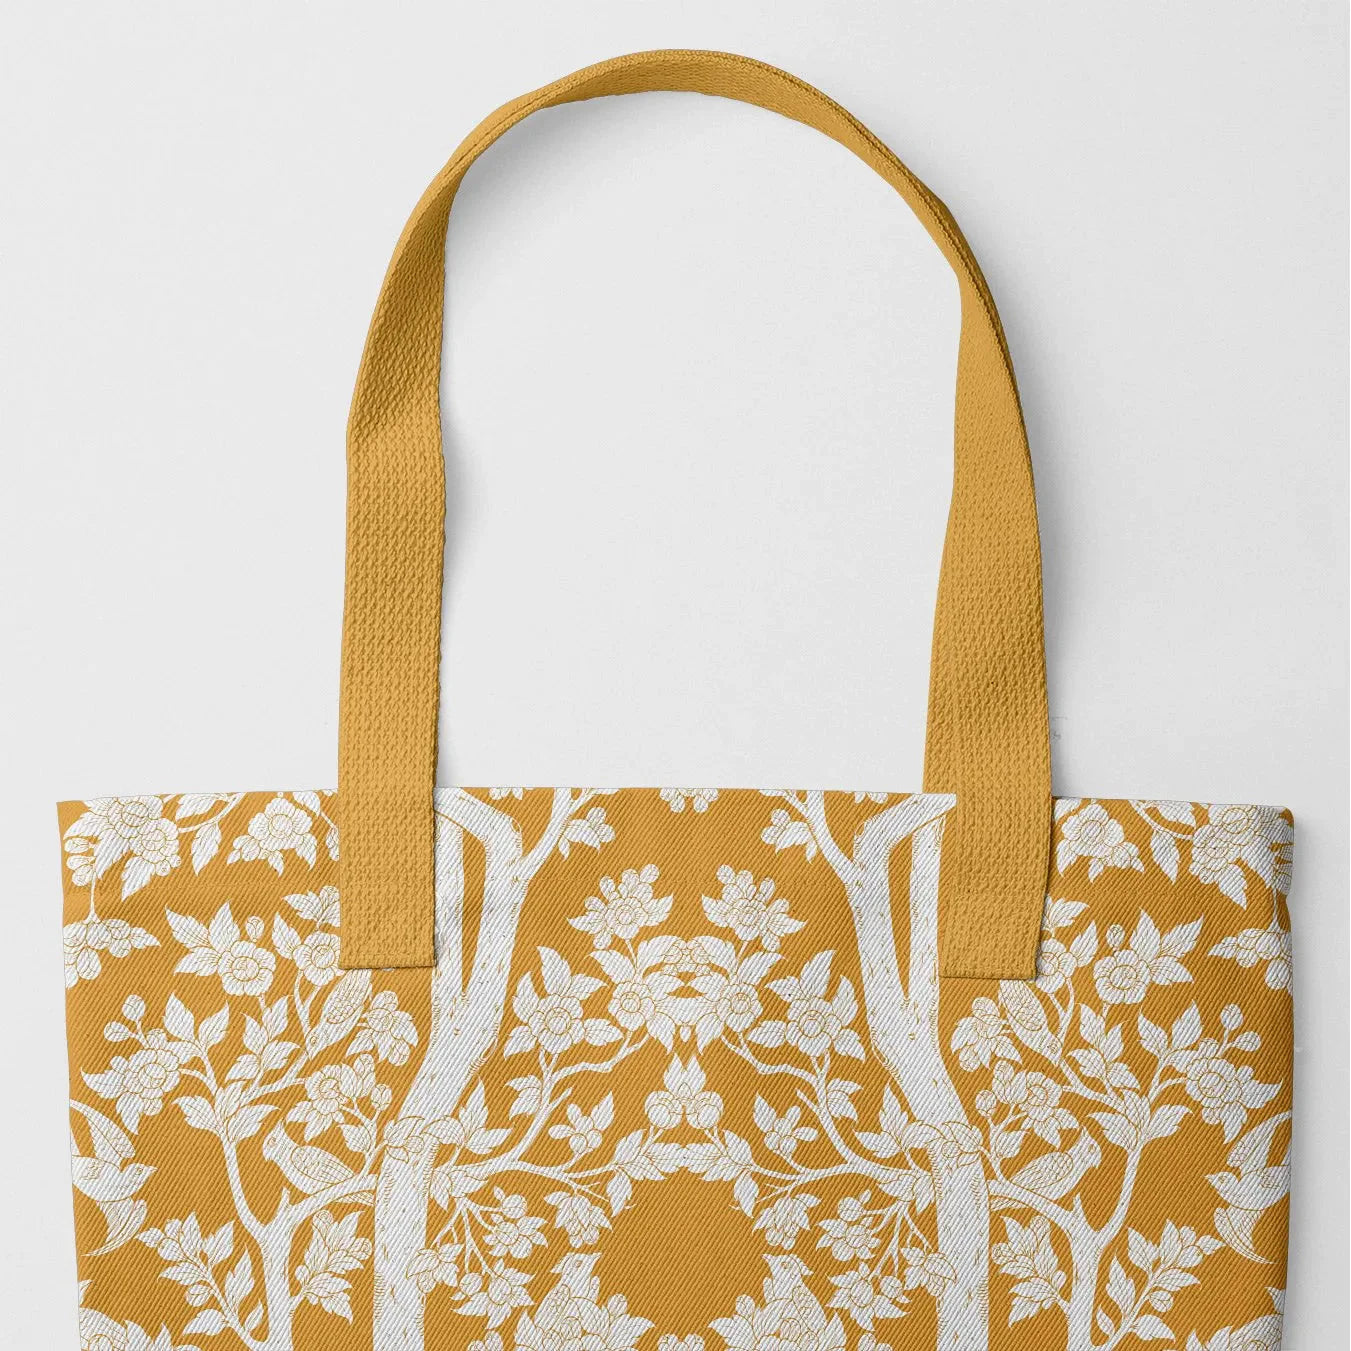 Aviary Tote - Goldfinch - Heavy Duty Reusable Grocery Bag - Yellow Handles - Shopping Totes - Aesthetic Art